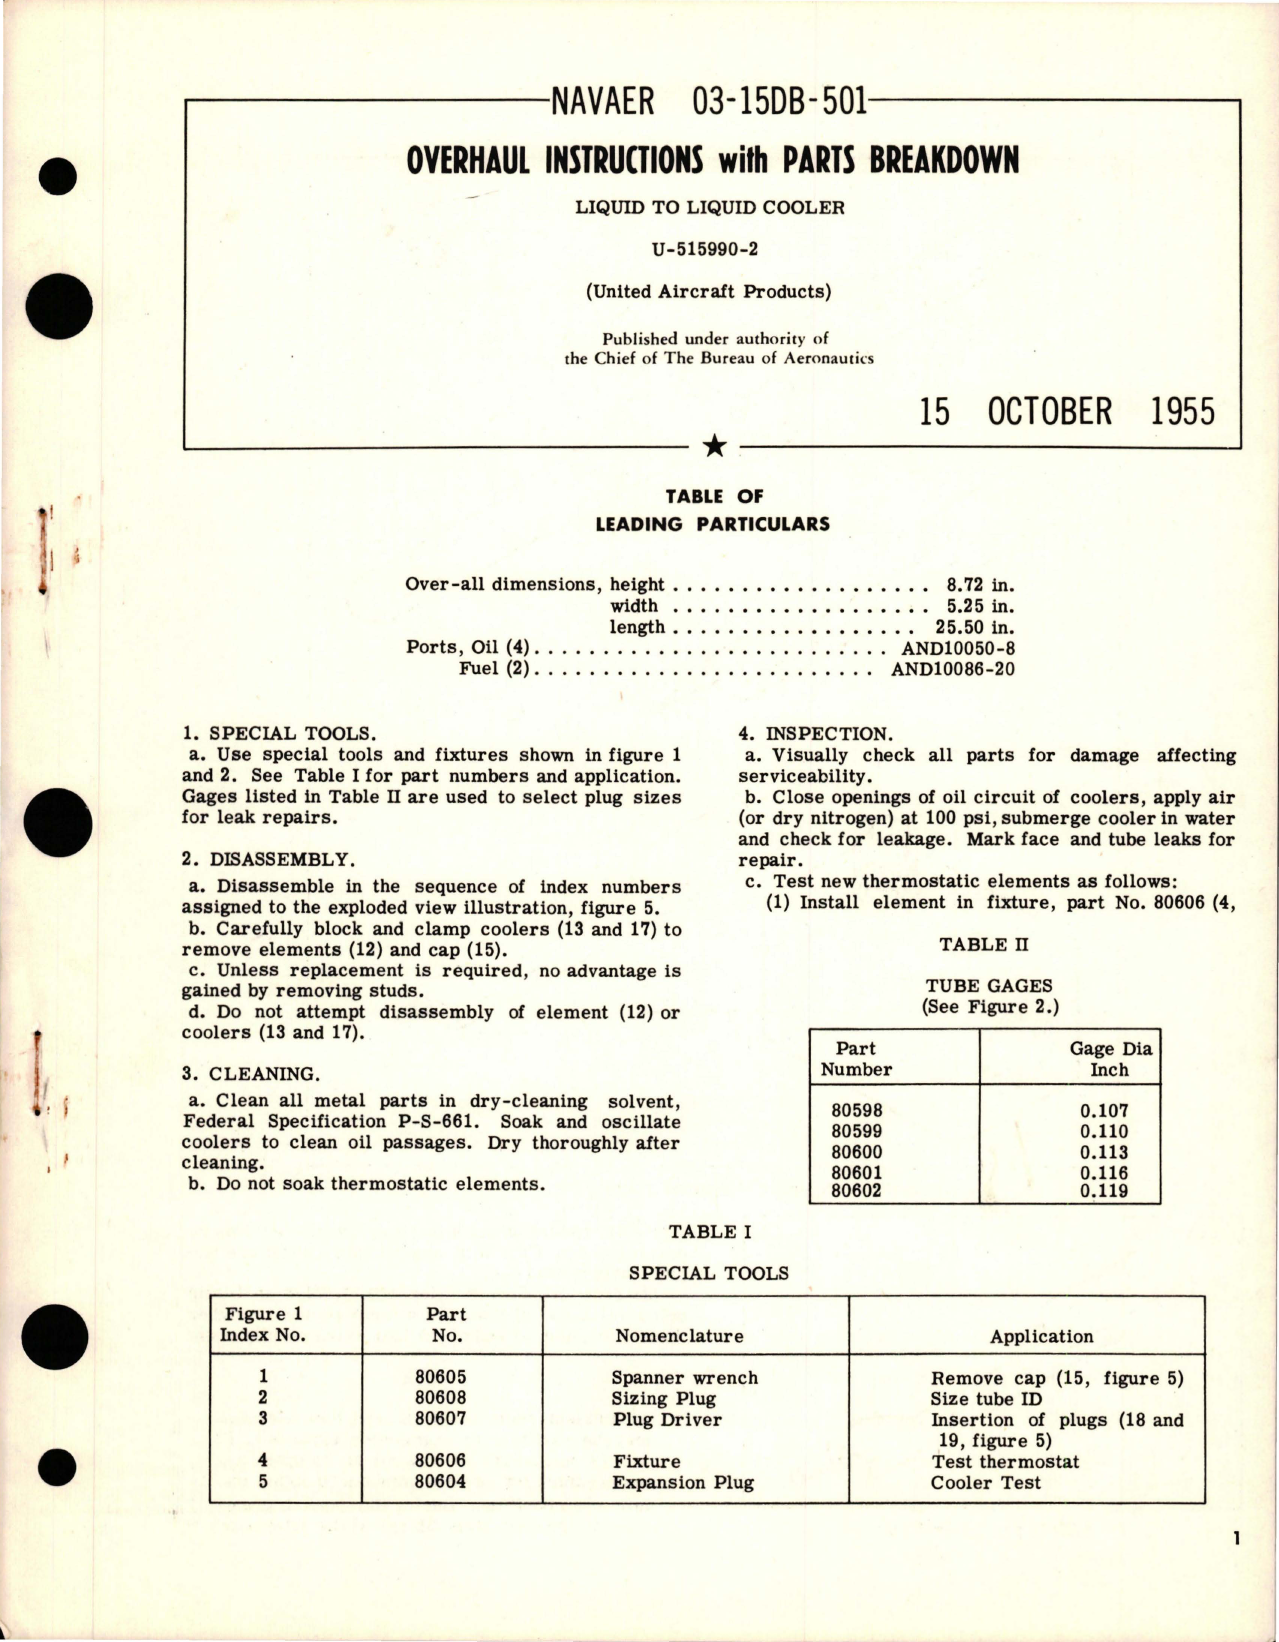 Sample page 1 from AirCorps Library document: Overhaul Instructions with Parts Breakdown for Liquid to Liquid Cooler - U-515990-2